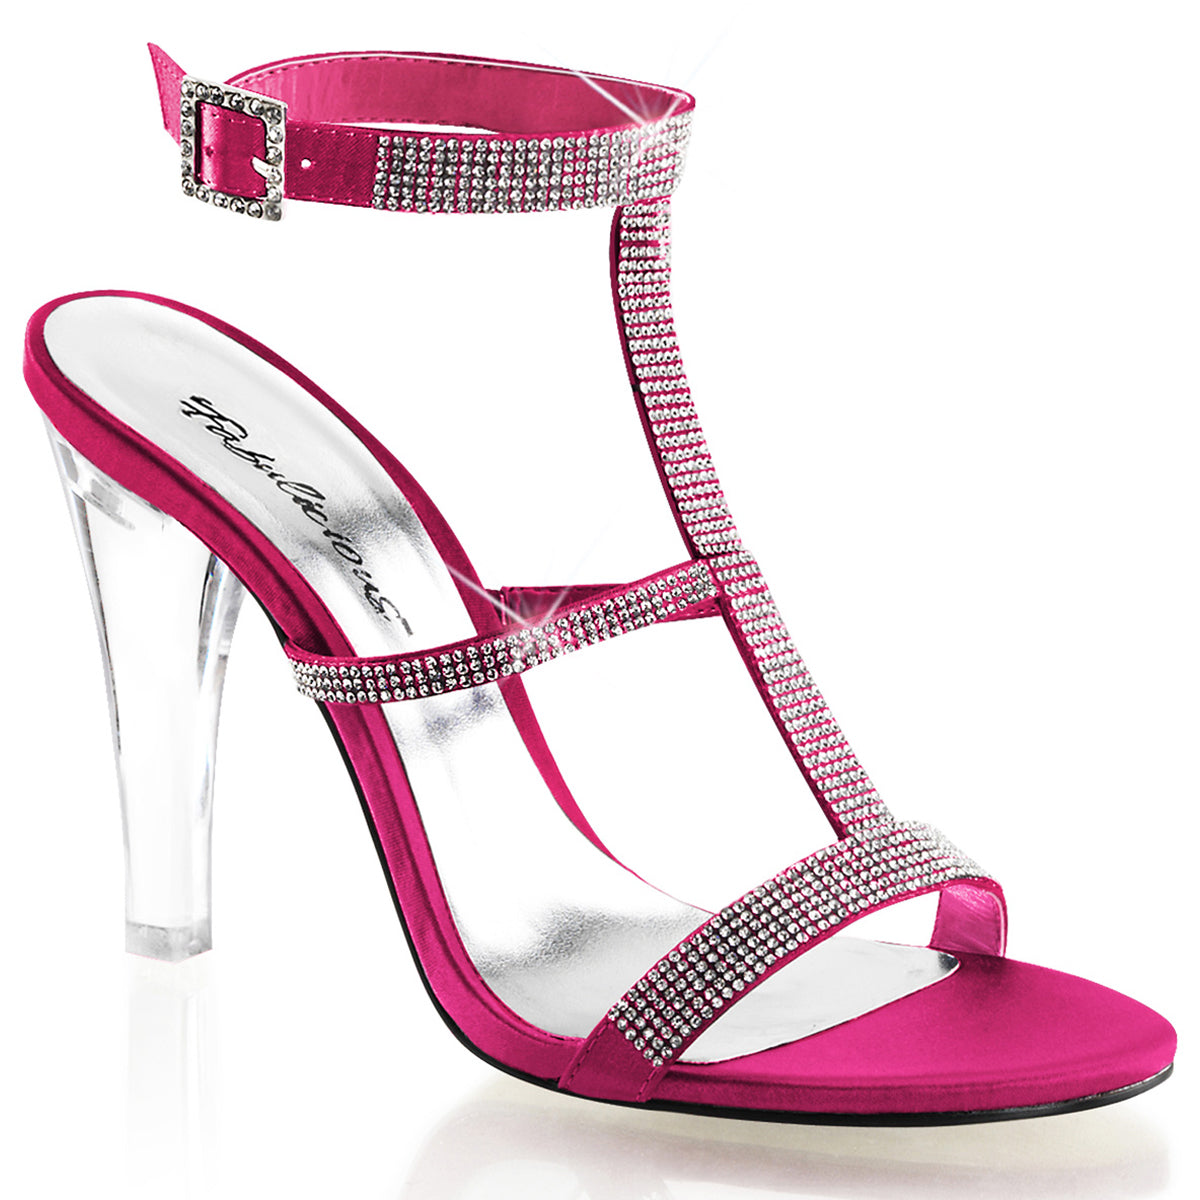 Sexy Rhinestone T-Strap Ankle Slingback Sandals High Heels Shoes Pleaser Fabulicious CLEARLY/418